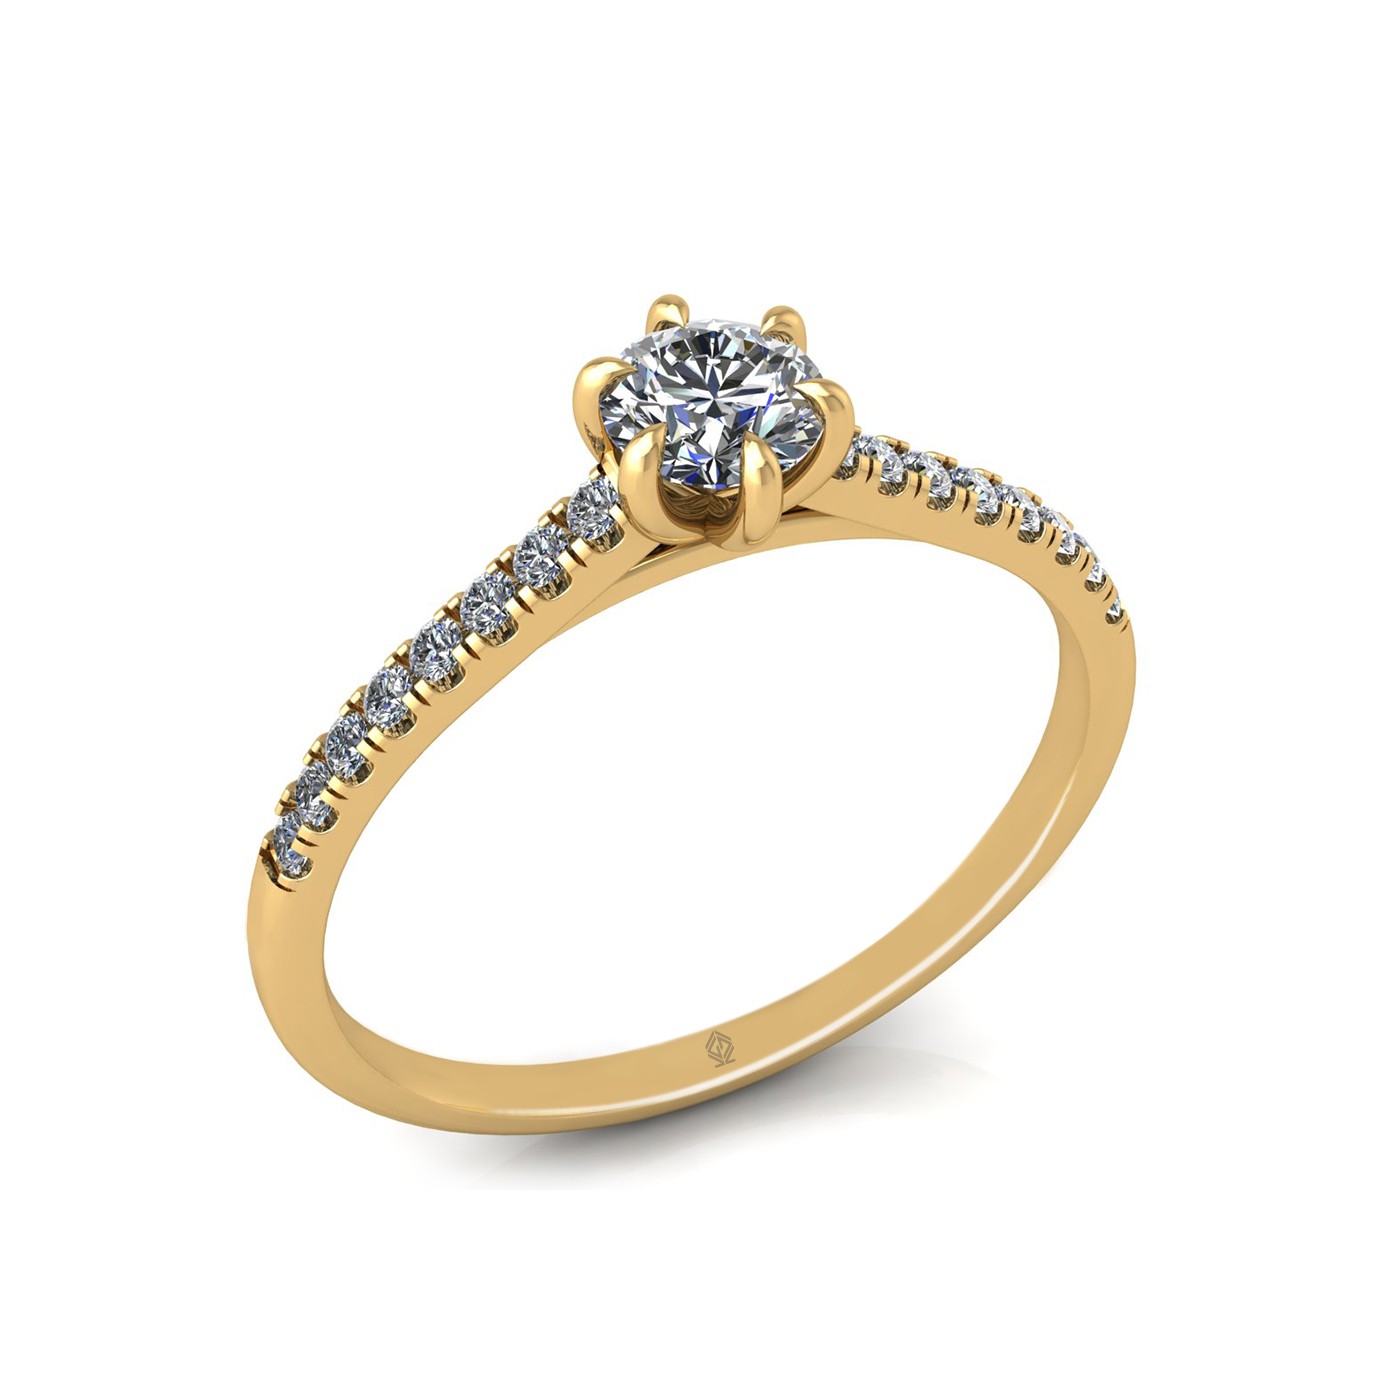 18k yellow gold  0,30 ct 6 prongs round cut diamond engagement ring with whisper thin pavÉ set band